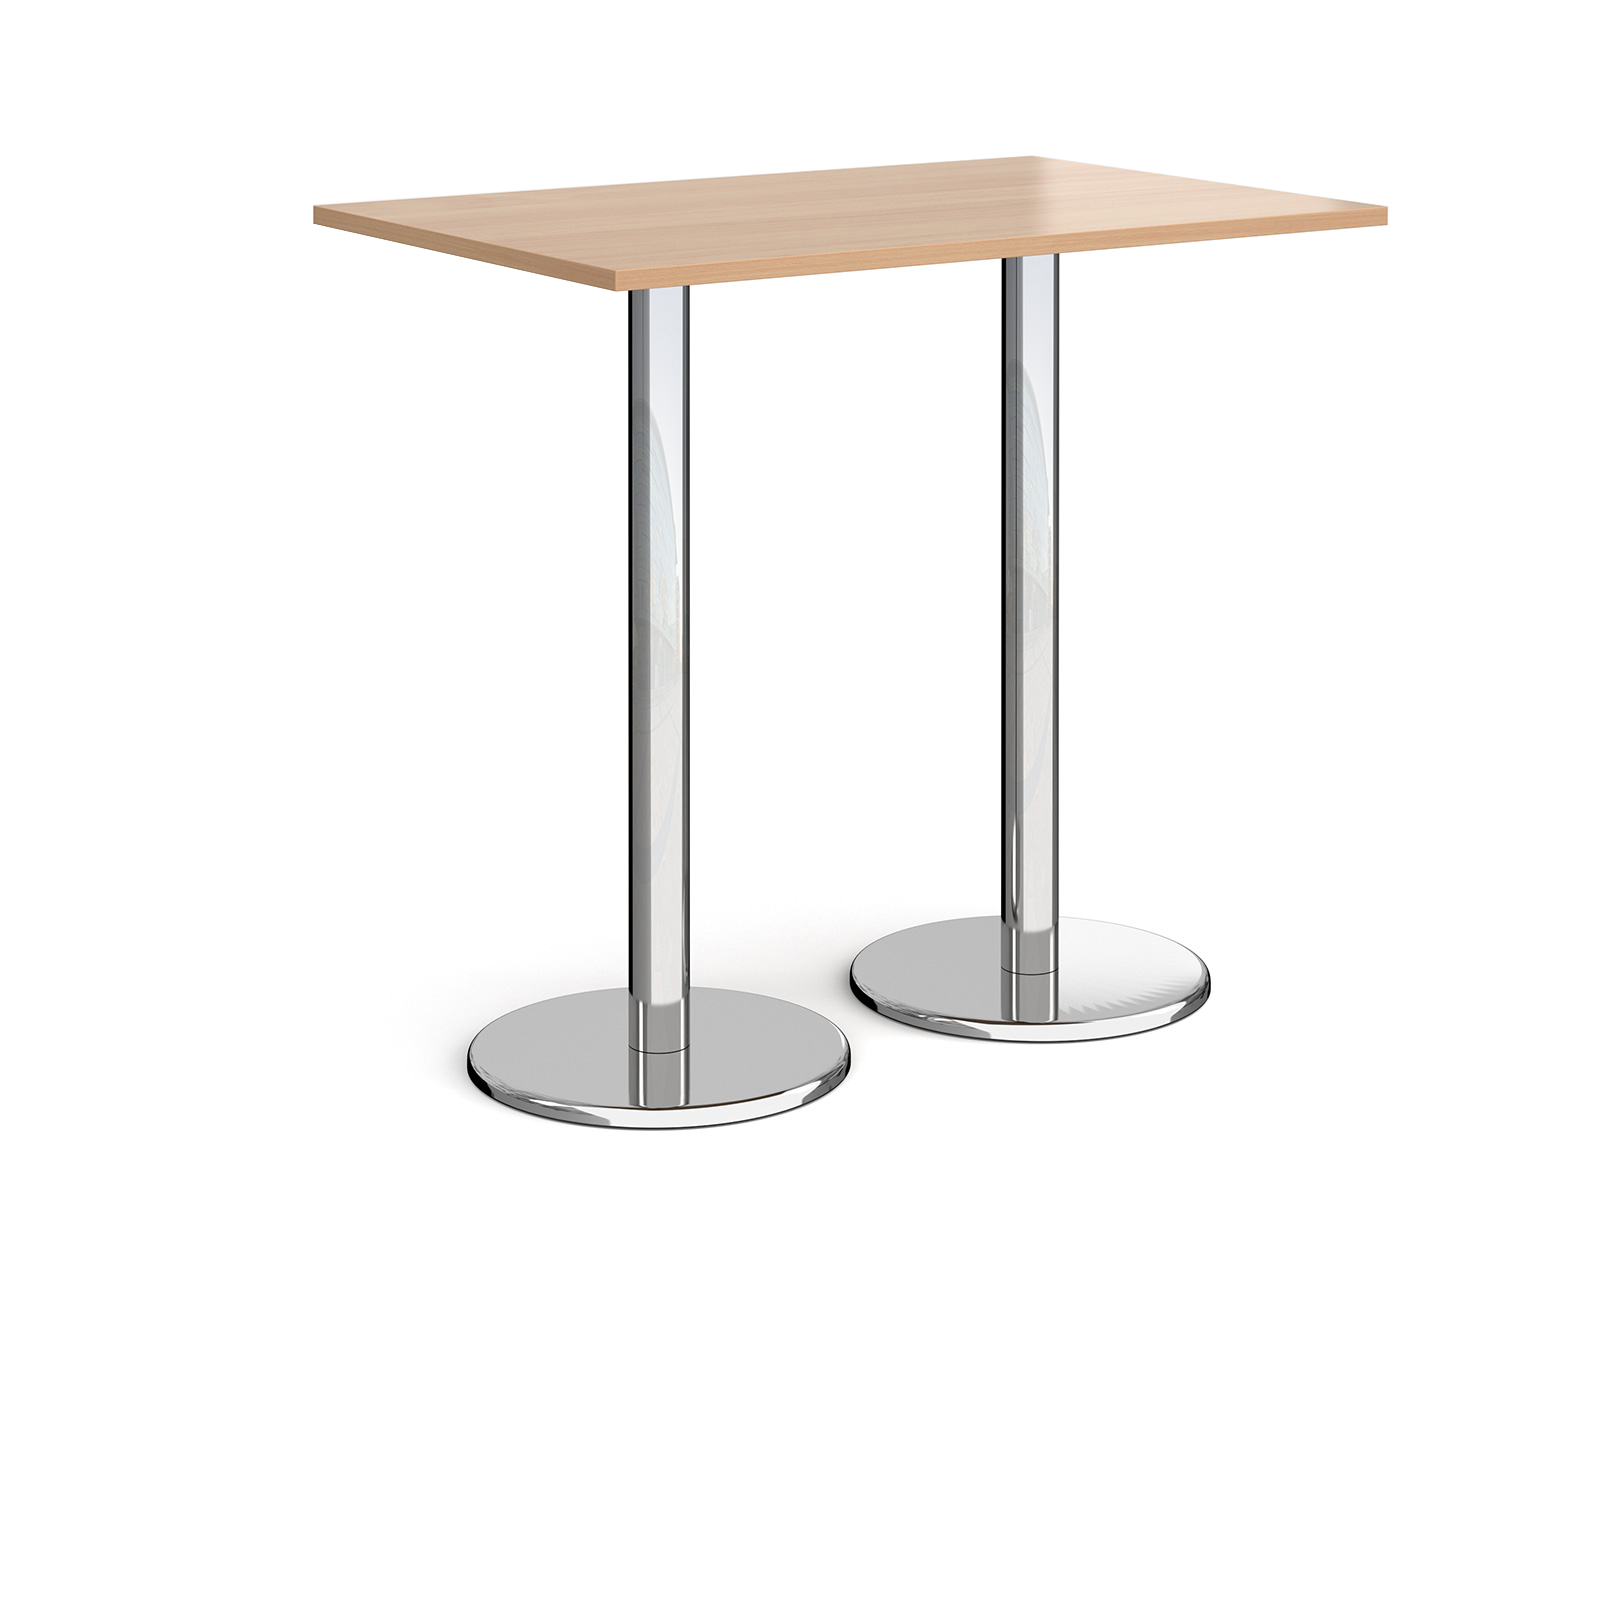 Pisa rectangular poseur table with round chrome bases 1200mm x 800mm - beech